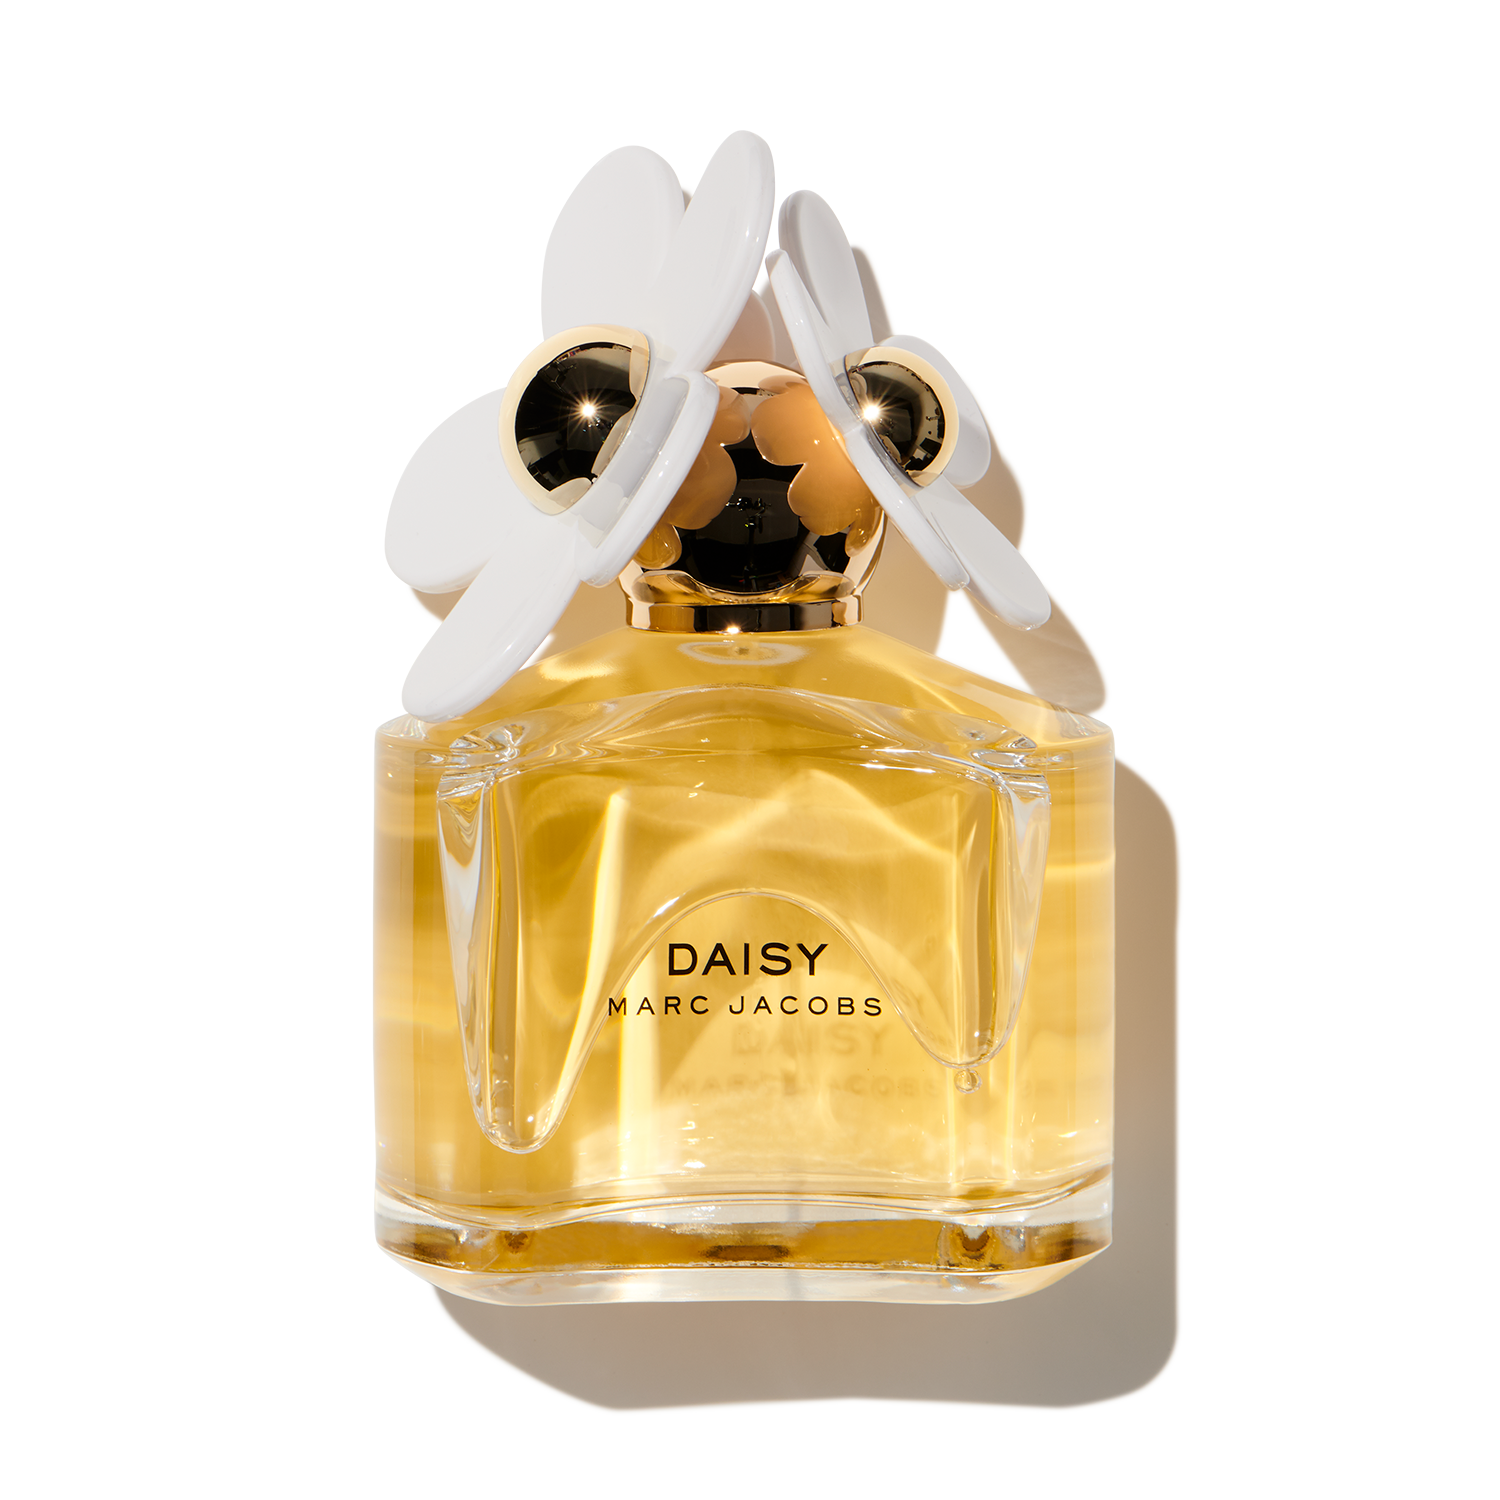 Buy MARC JACOBS Daisy for $16.95 at Scentbird